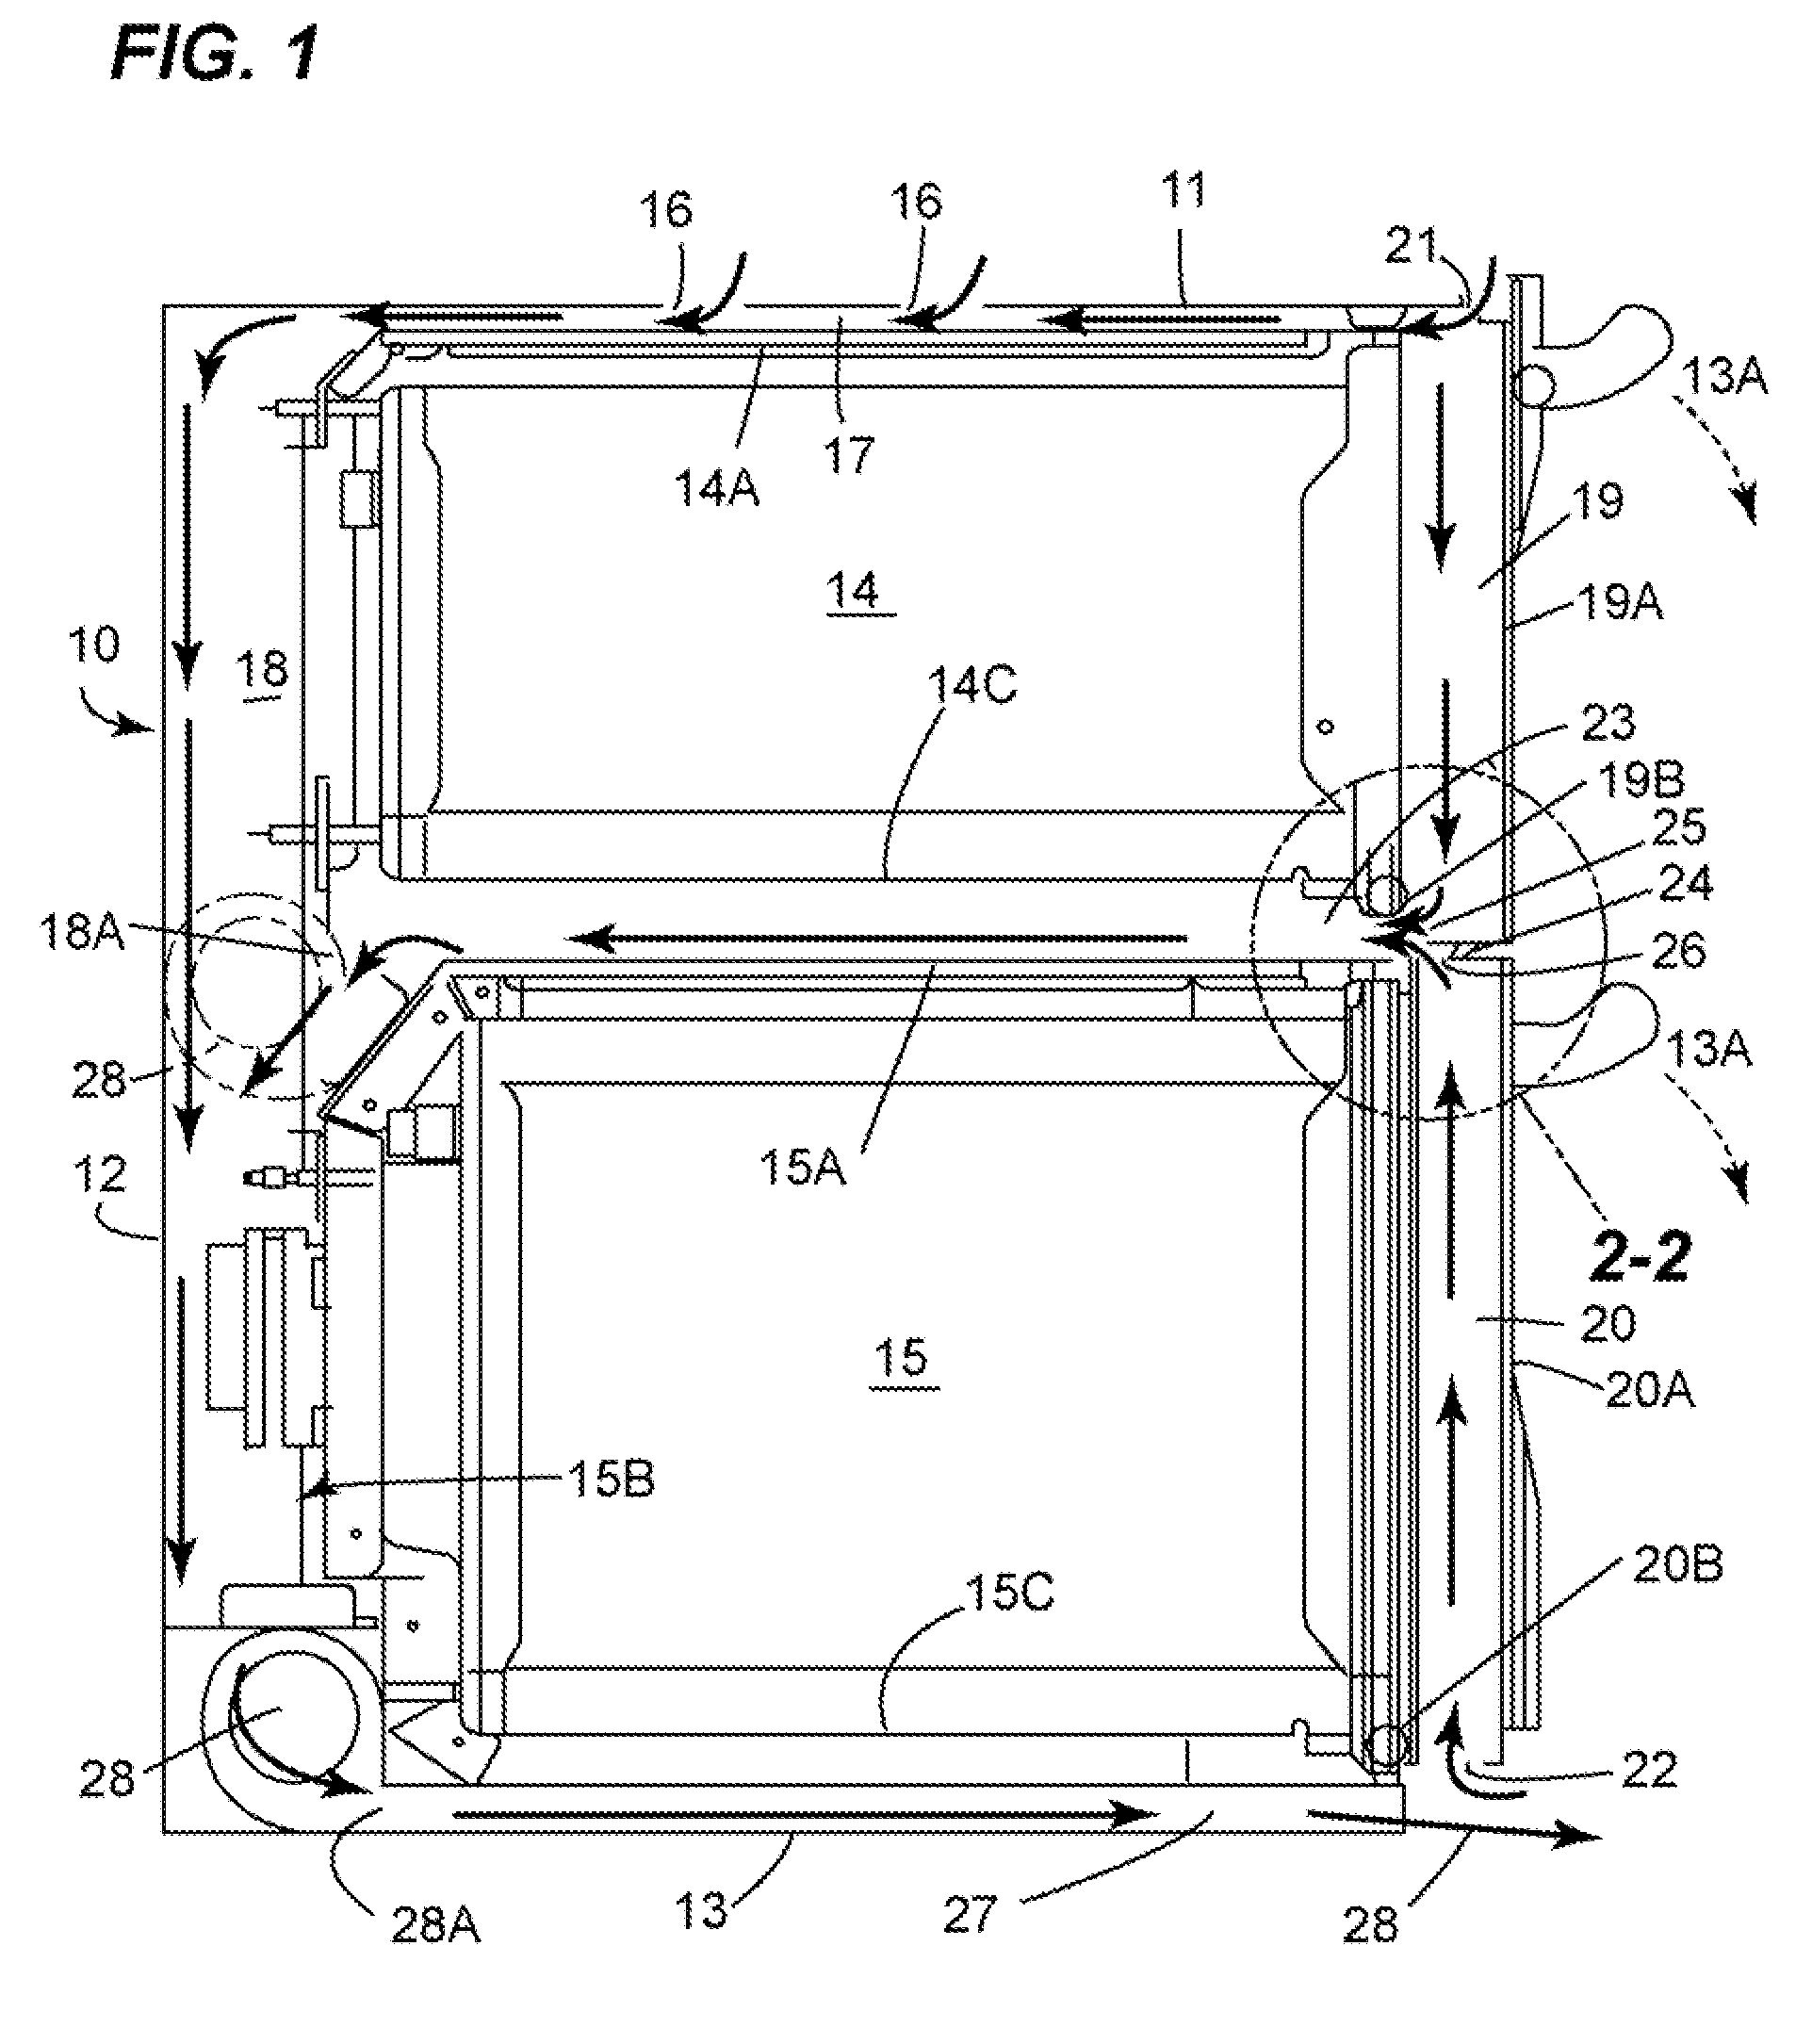 Appliance with a vacuum-based reverse airflow cooling system